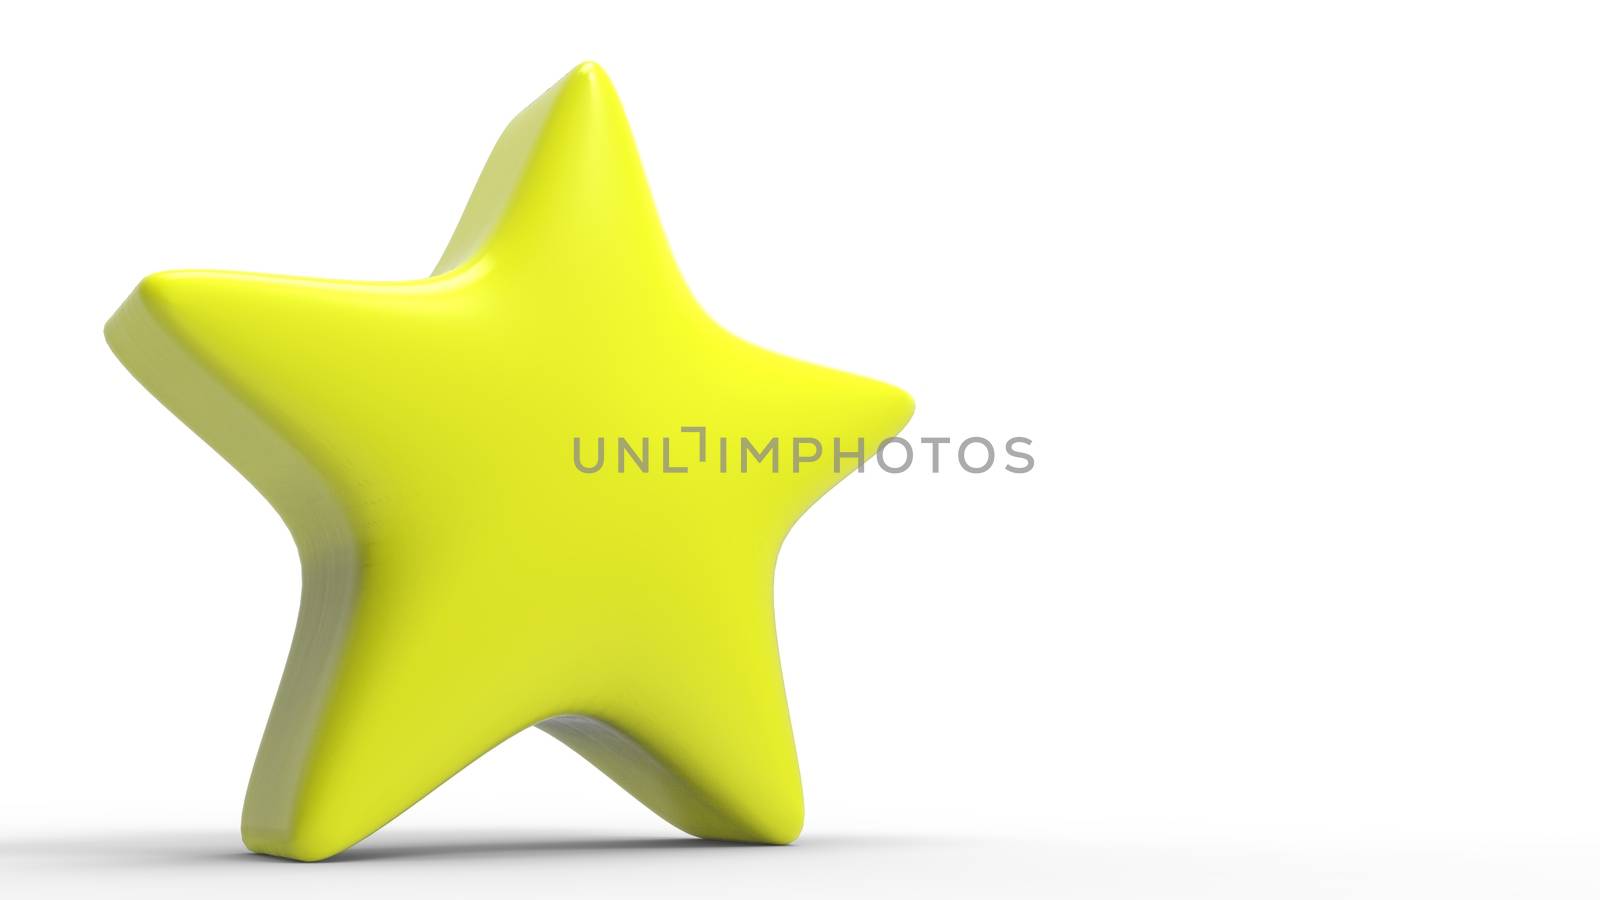 3d yellow star on color background. Render and illustration of golden star for premium